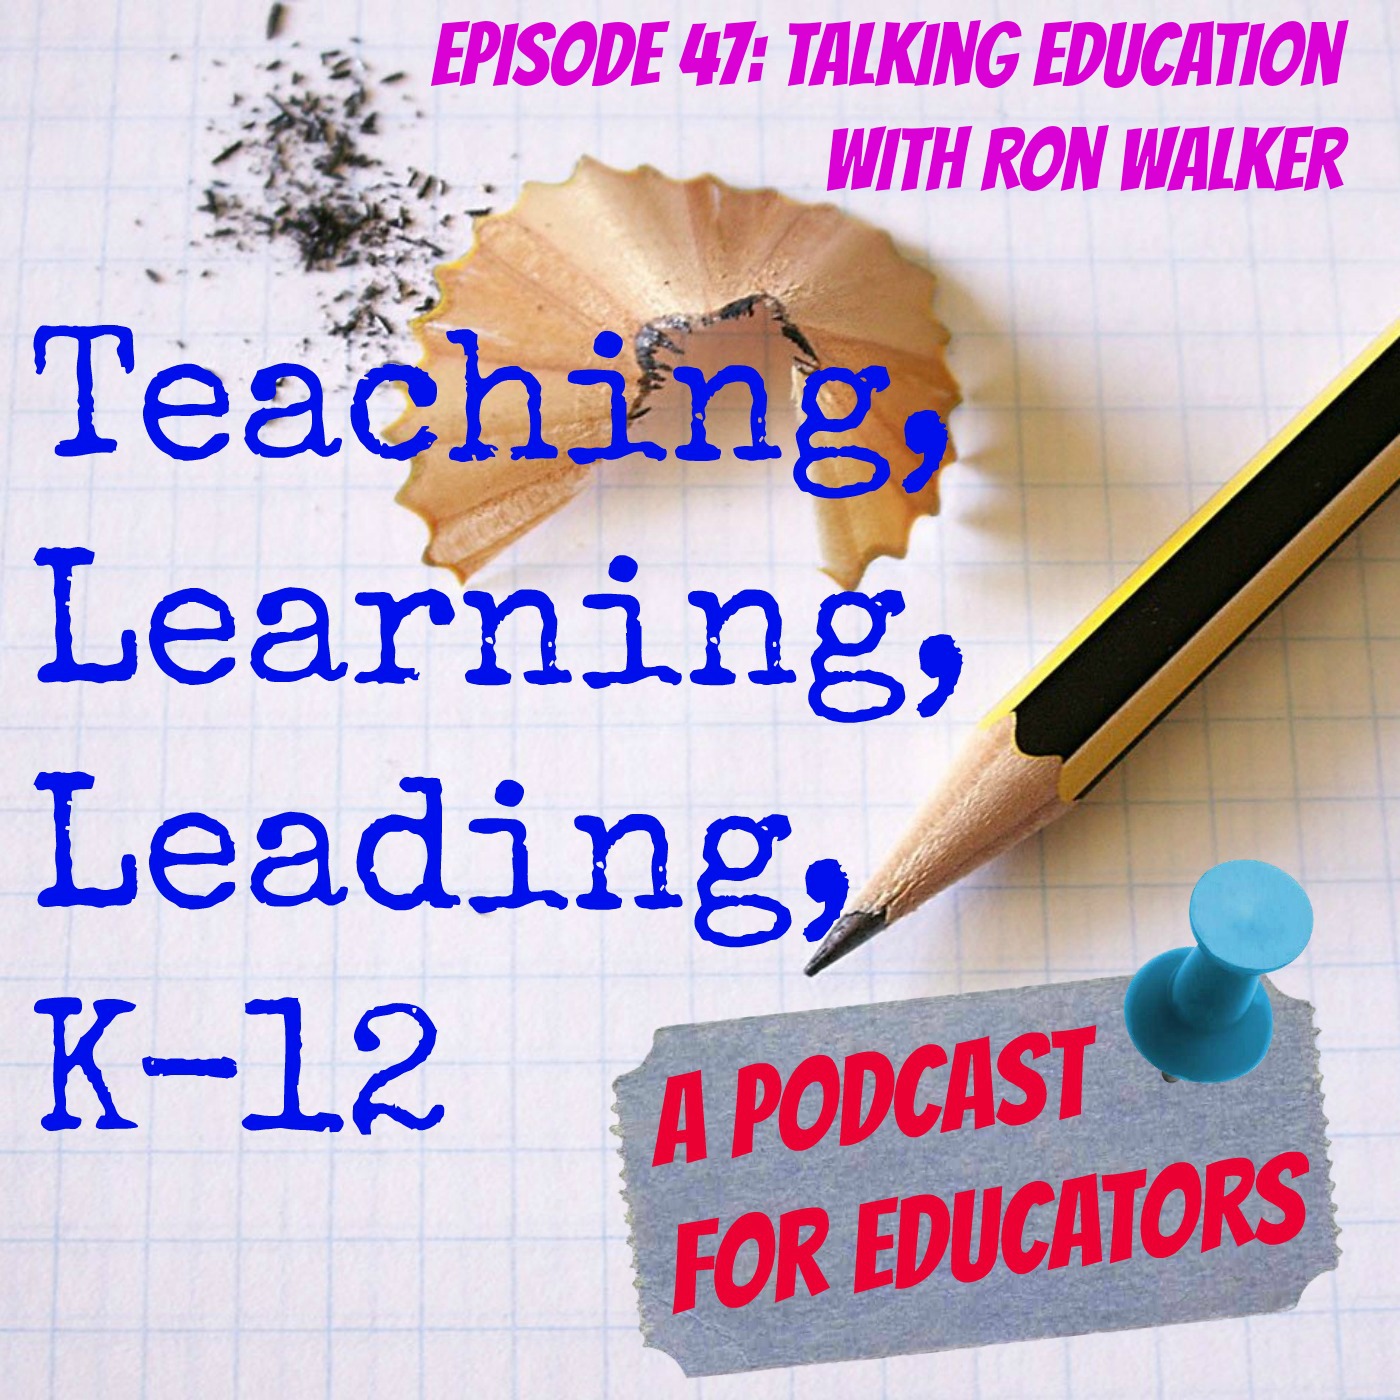 Episode 47: Talking Education With Ron Walker